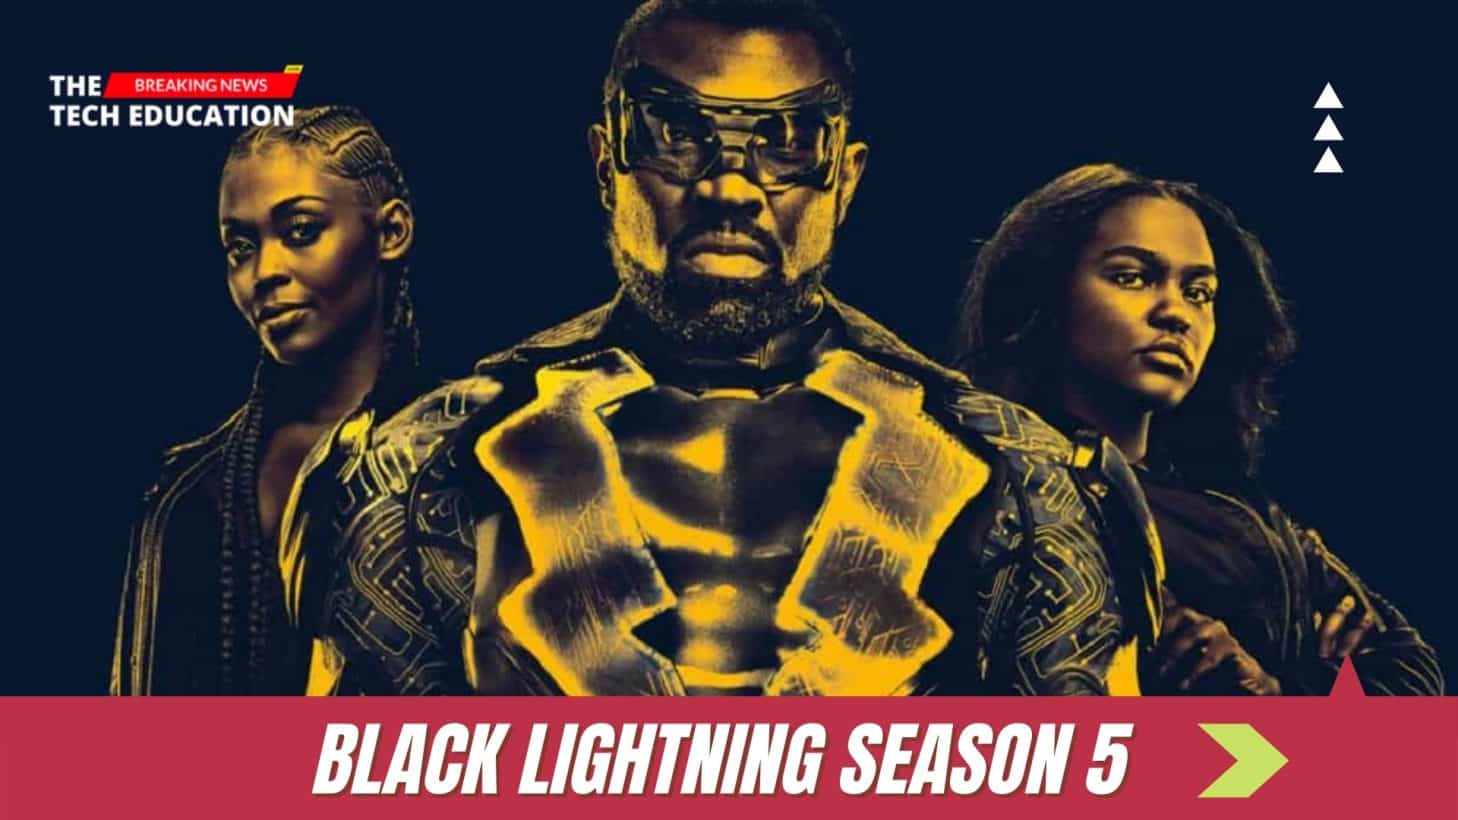 Black Lightning Season 5 Expected Release Date, Star Cast, Plot and More Updates